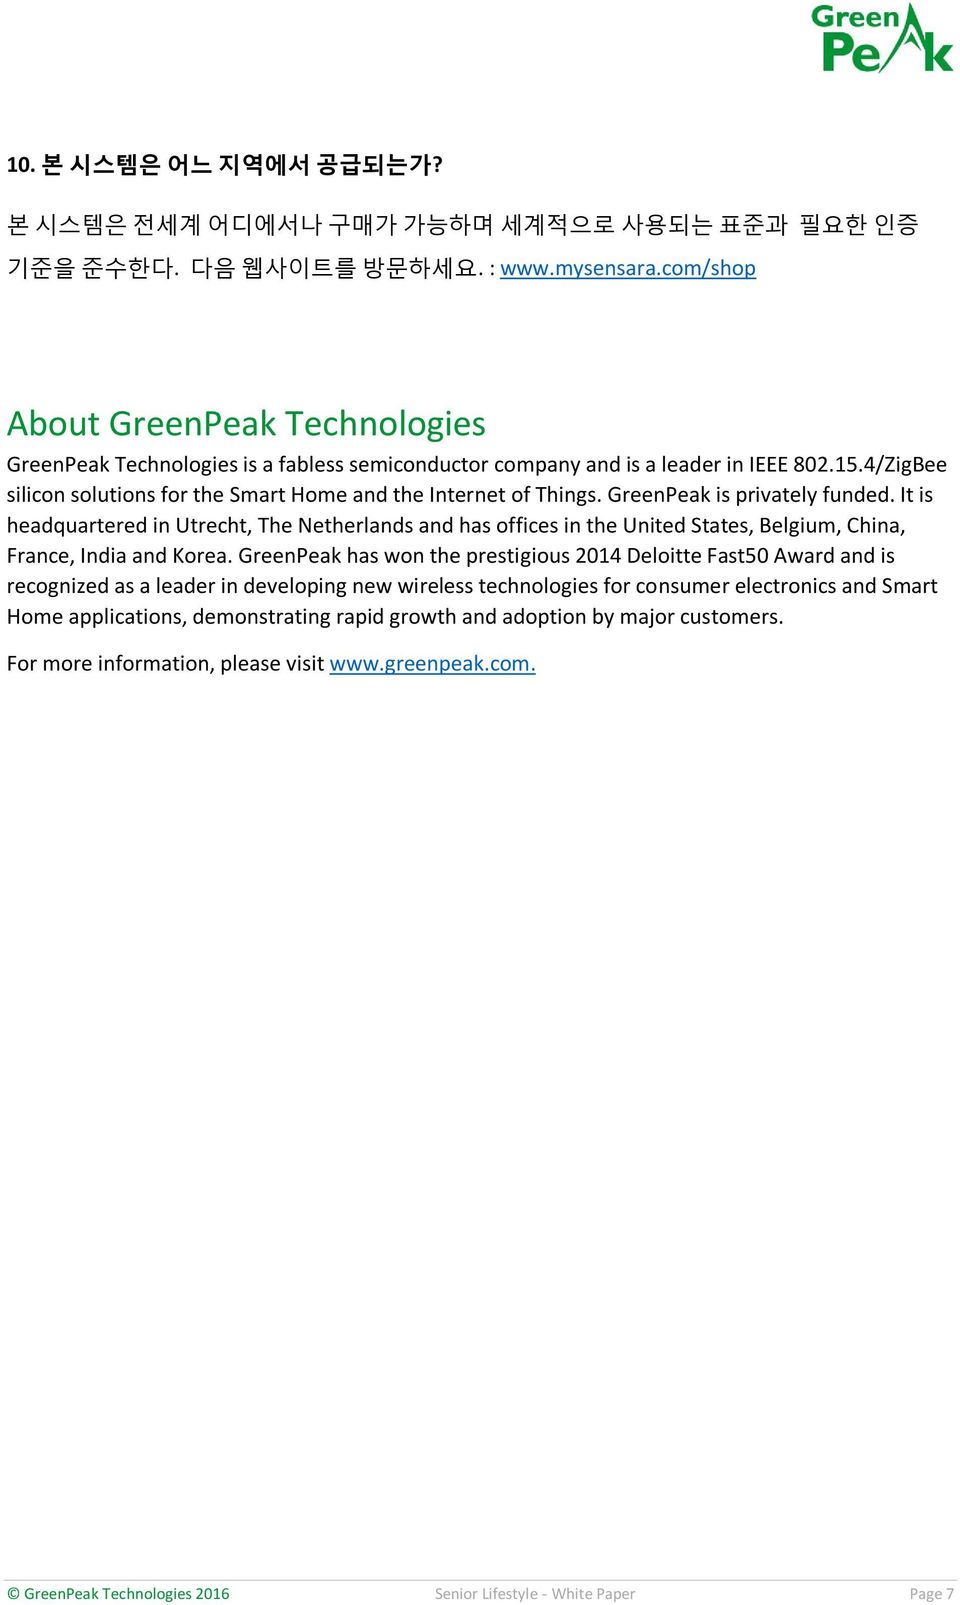 GreenPeak is privately funded. It is headquartered in Utrecht, The Netherlands and has offices in the United States, Belgium, China, France, India and Korea.